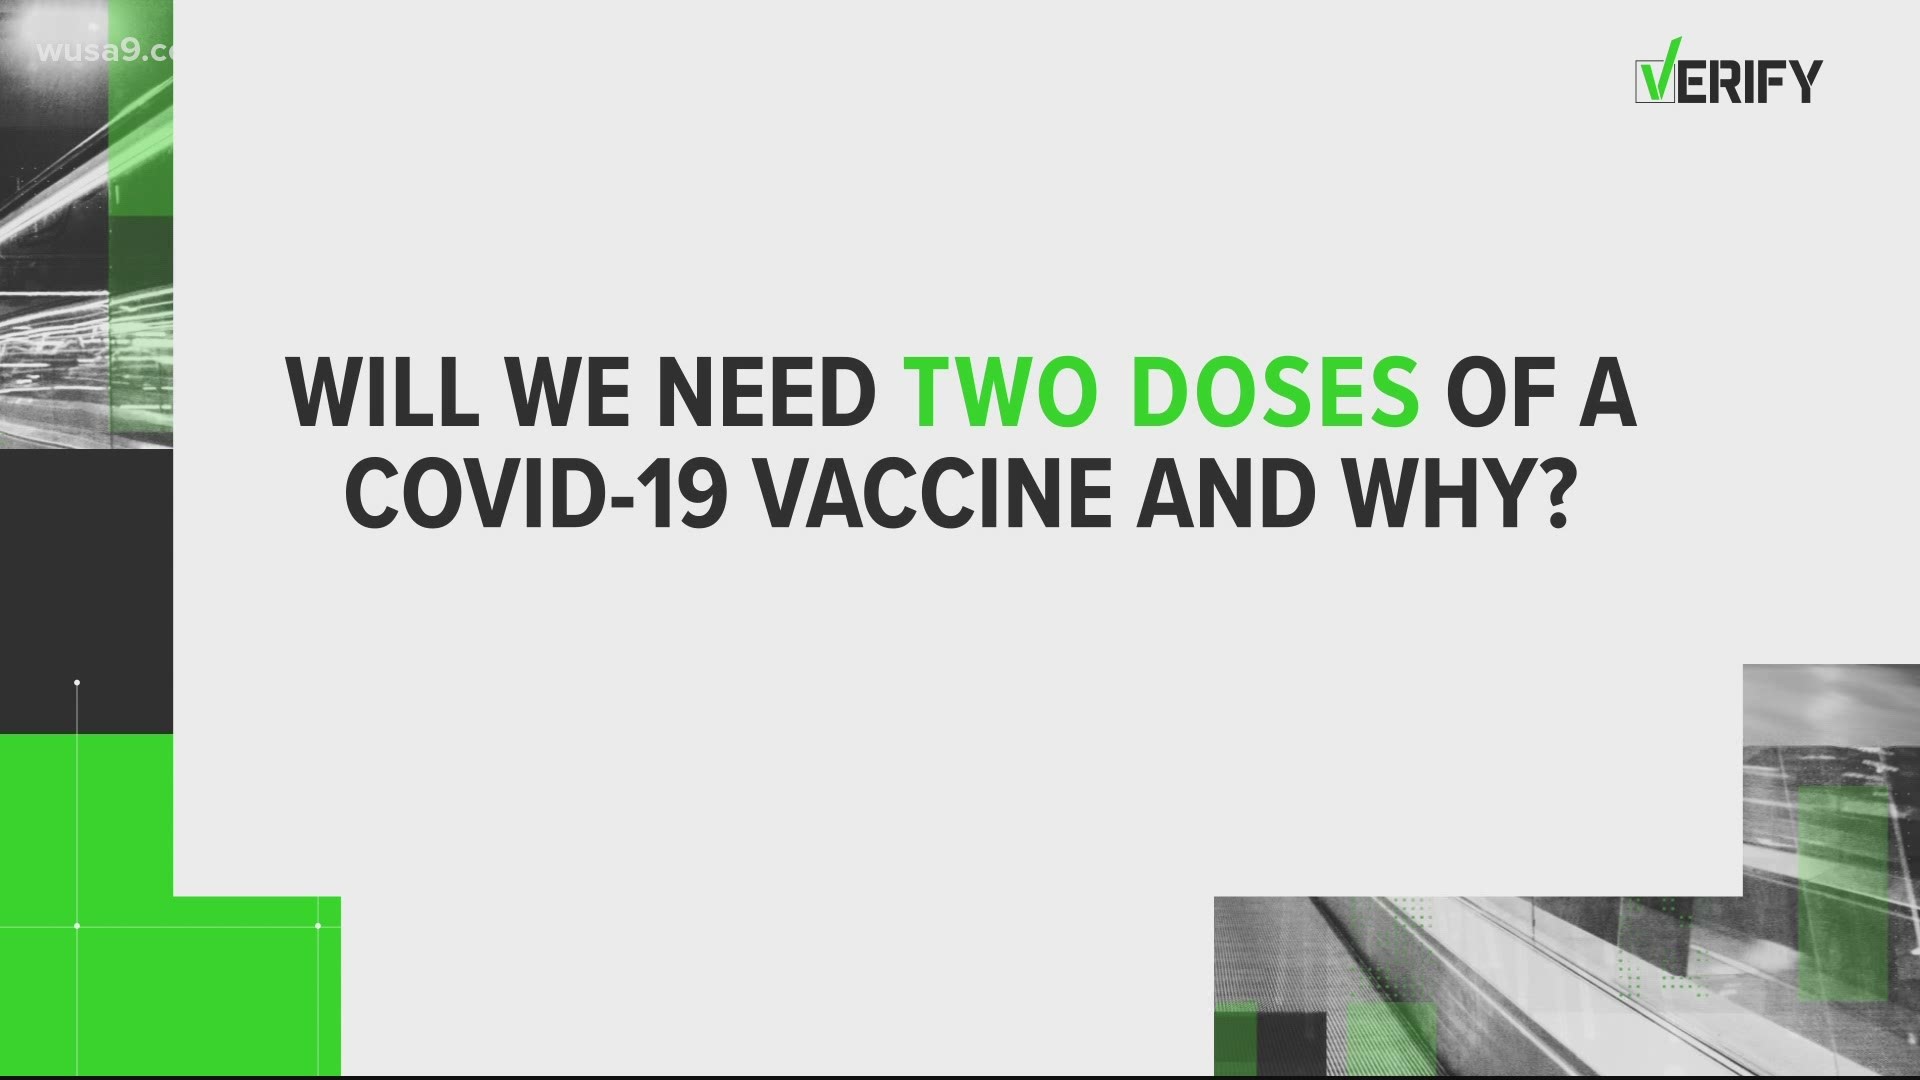 Yes, it is very likely that the COVID-19 vaccine will require two doses.